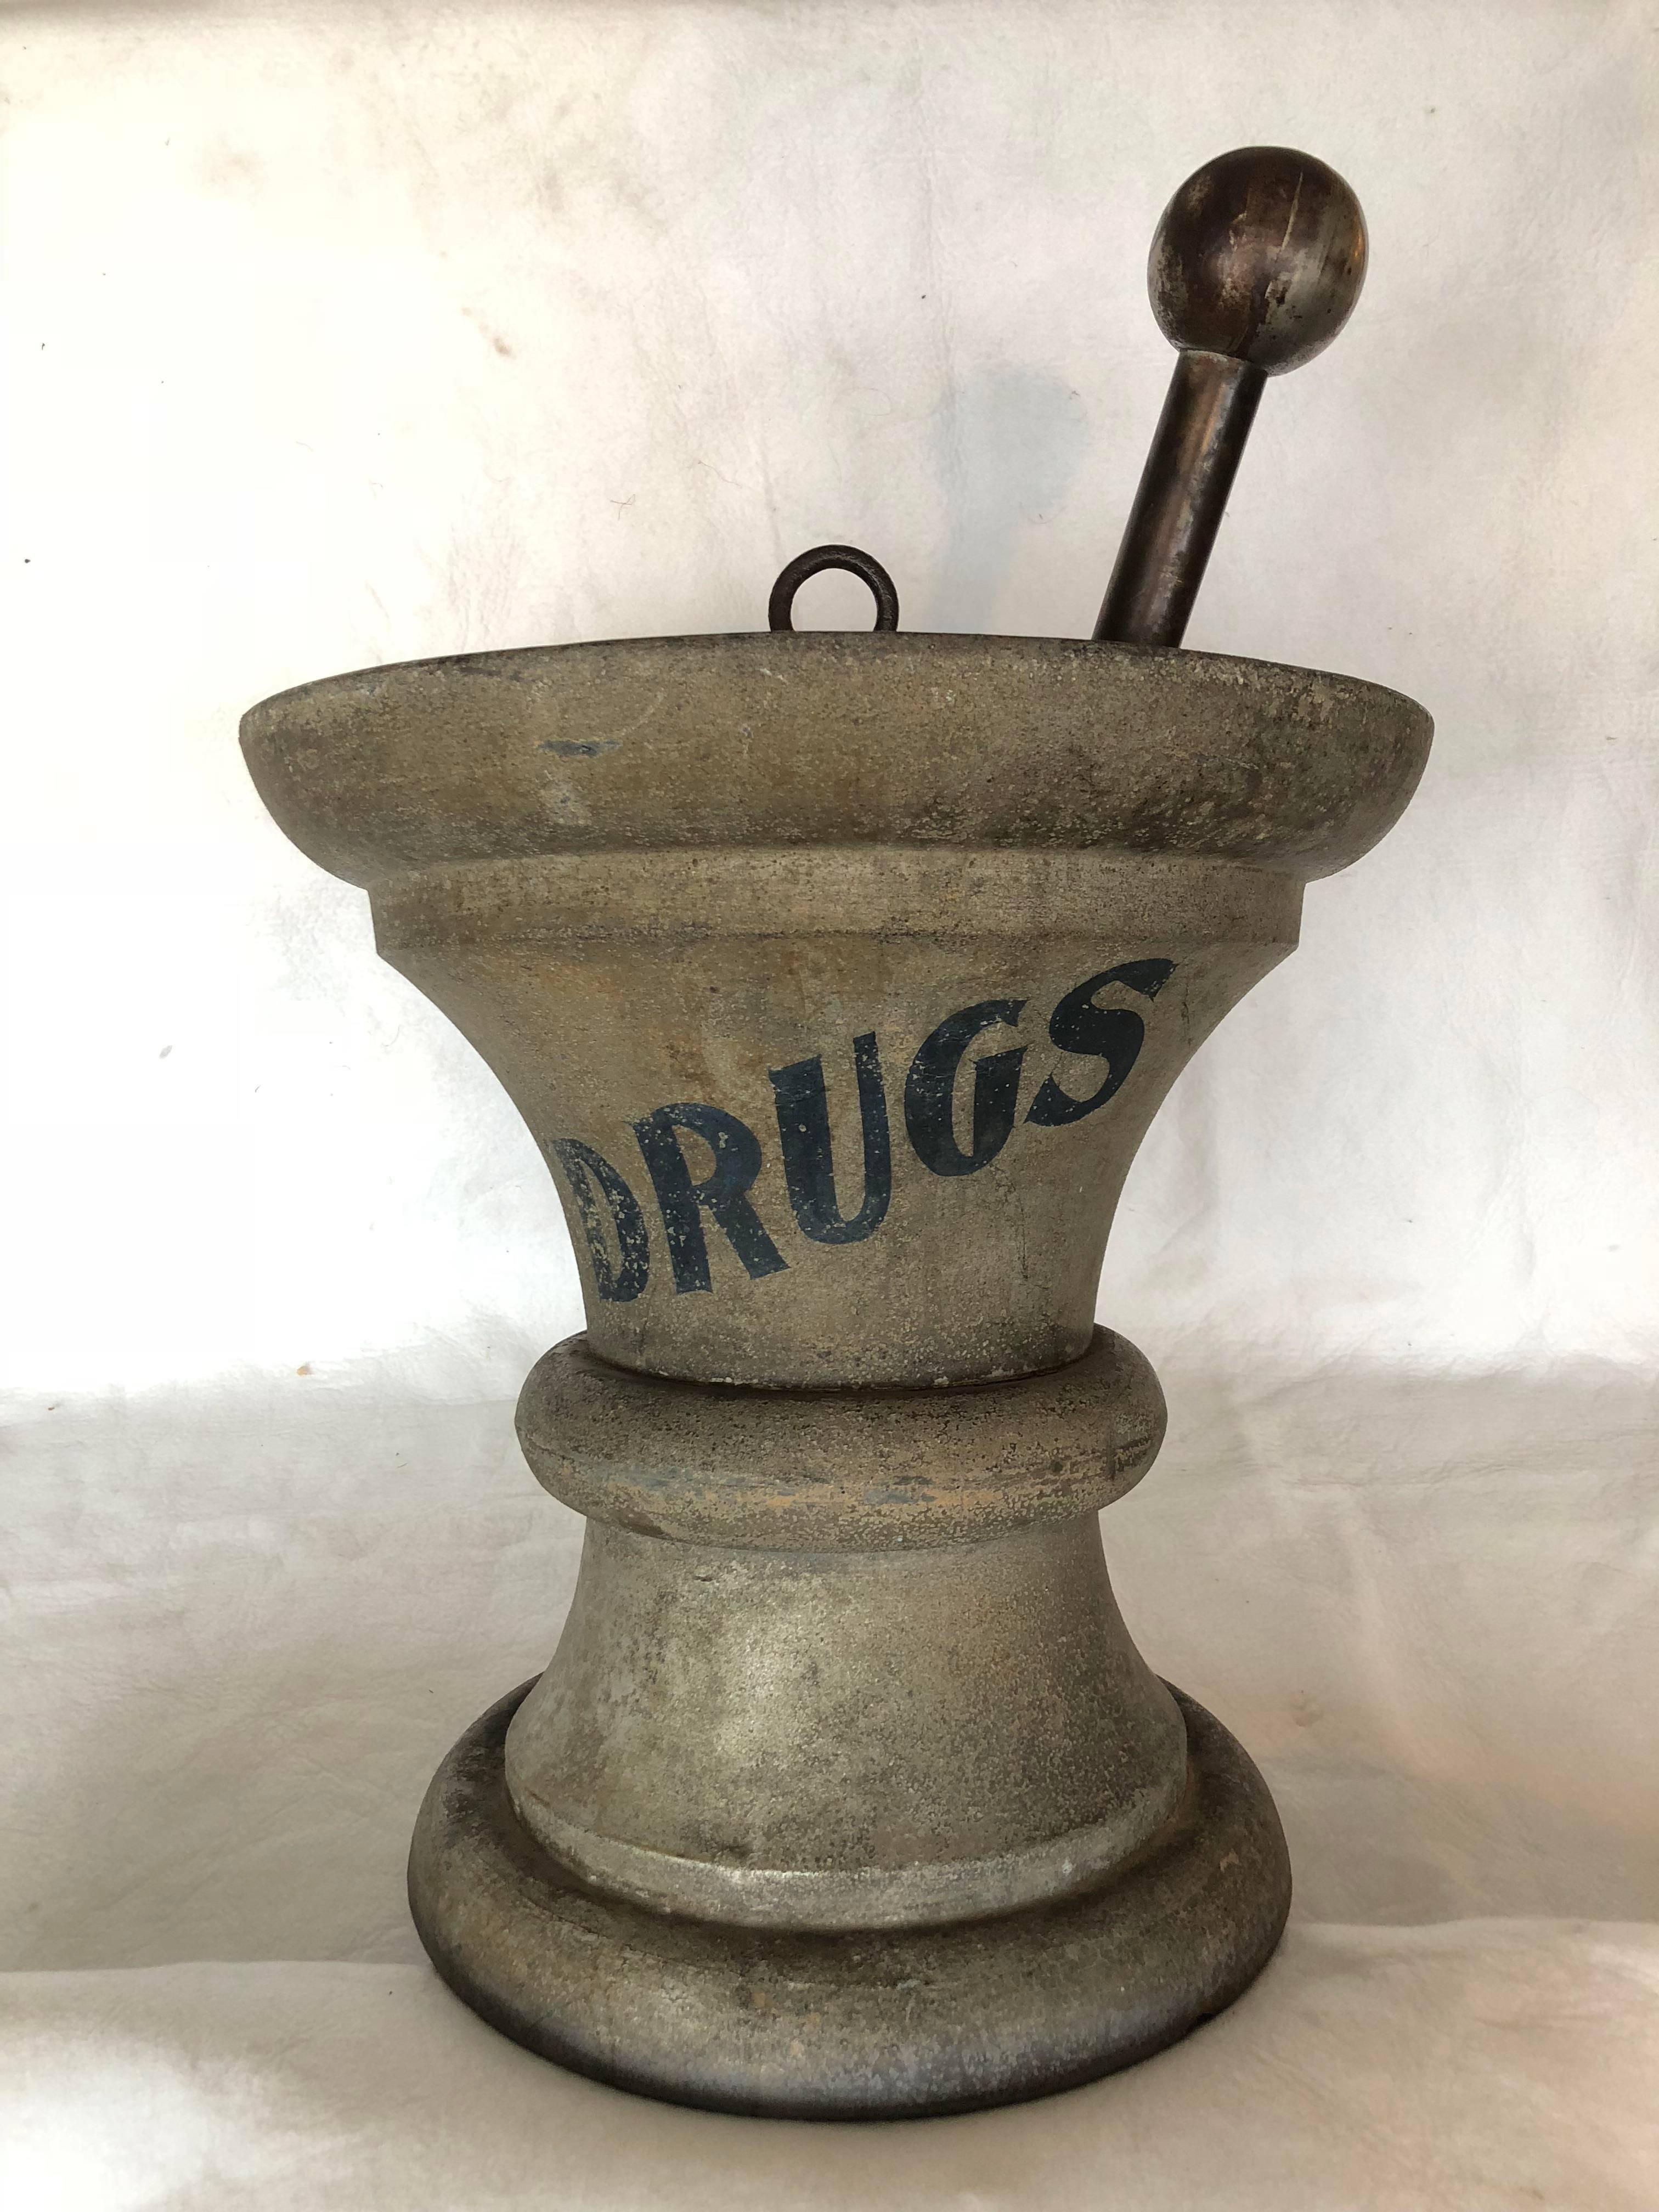 19th century apothecary trade sign in the form of a mortar and pestle in full round tin, finished in grey sand paint with word 'drugs' in black on the diagonal, central hanging loop, nickel-plated pestle knob, 18